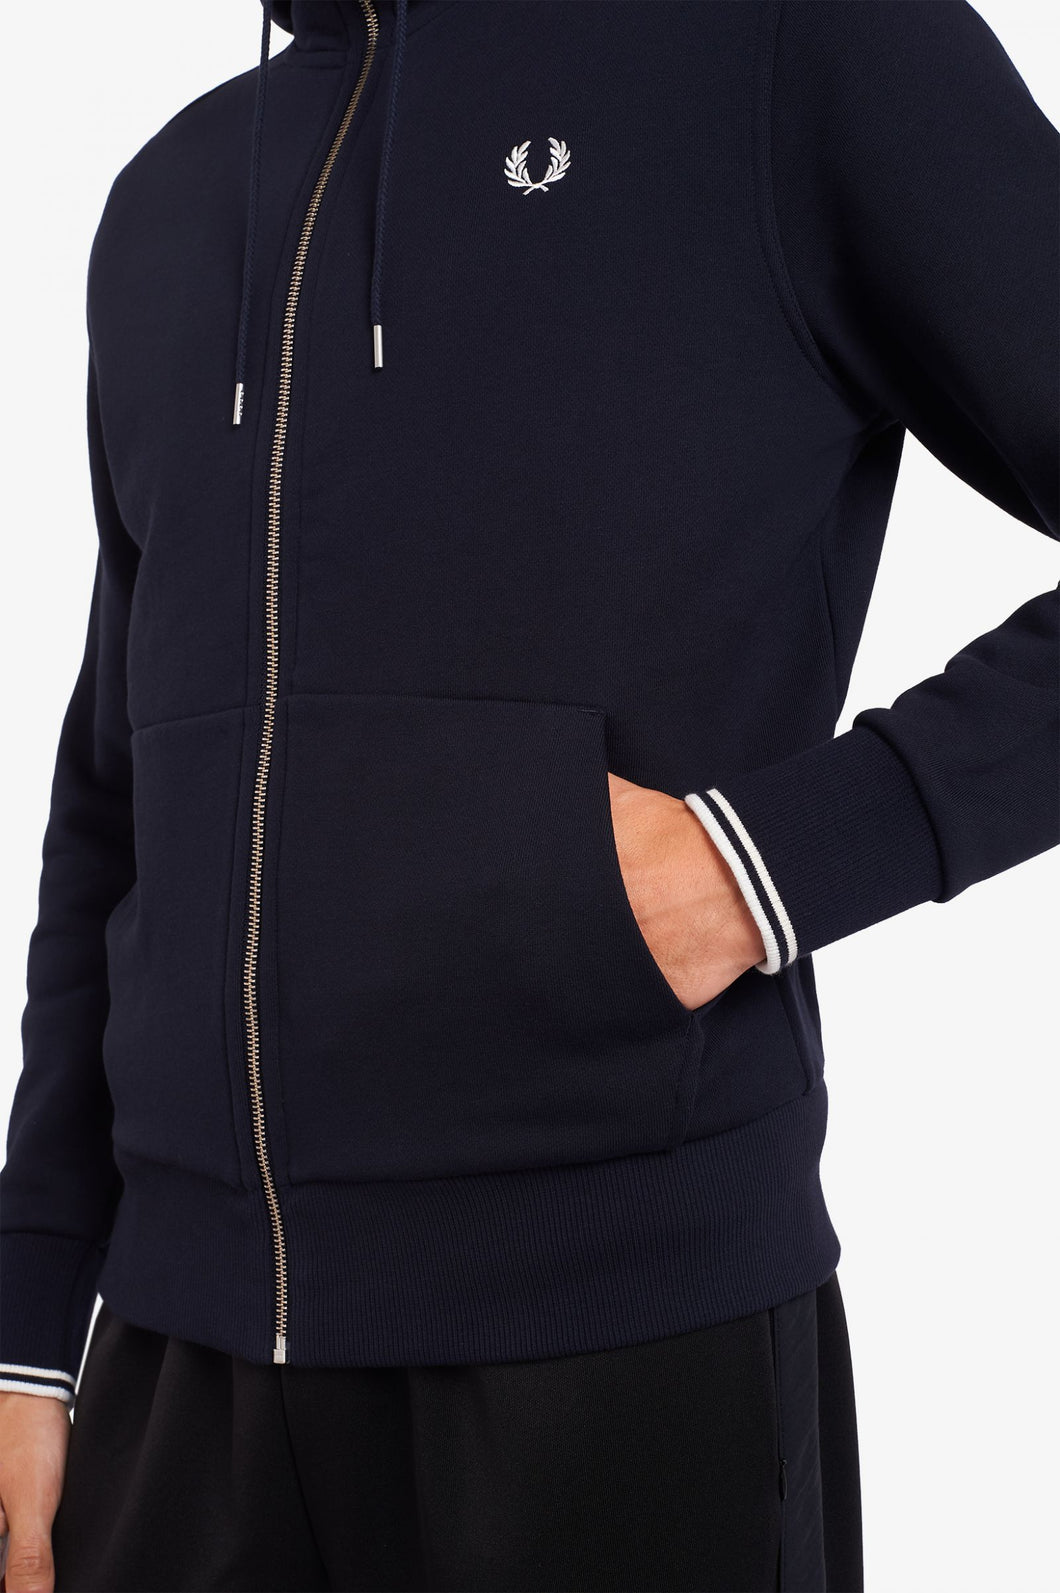 Sweat Capuche Fred Perry